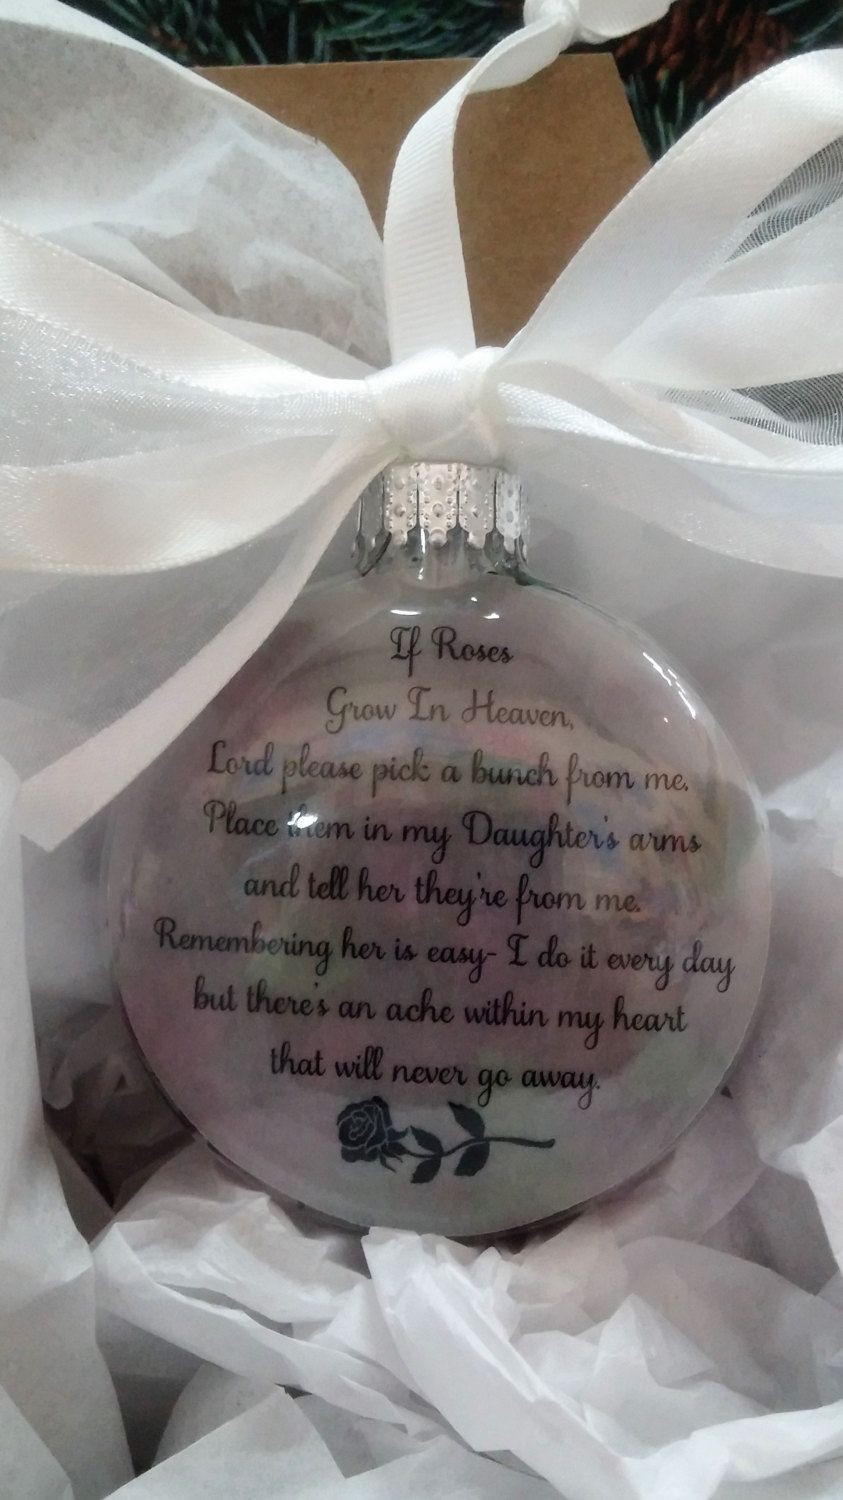 Gifts For Loss Of A Child
 Daughter Memorial Gift "If Roses Grow In Heaven" In Memory